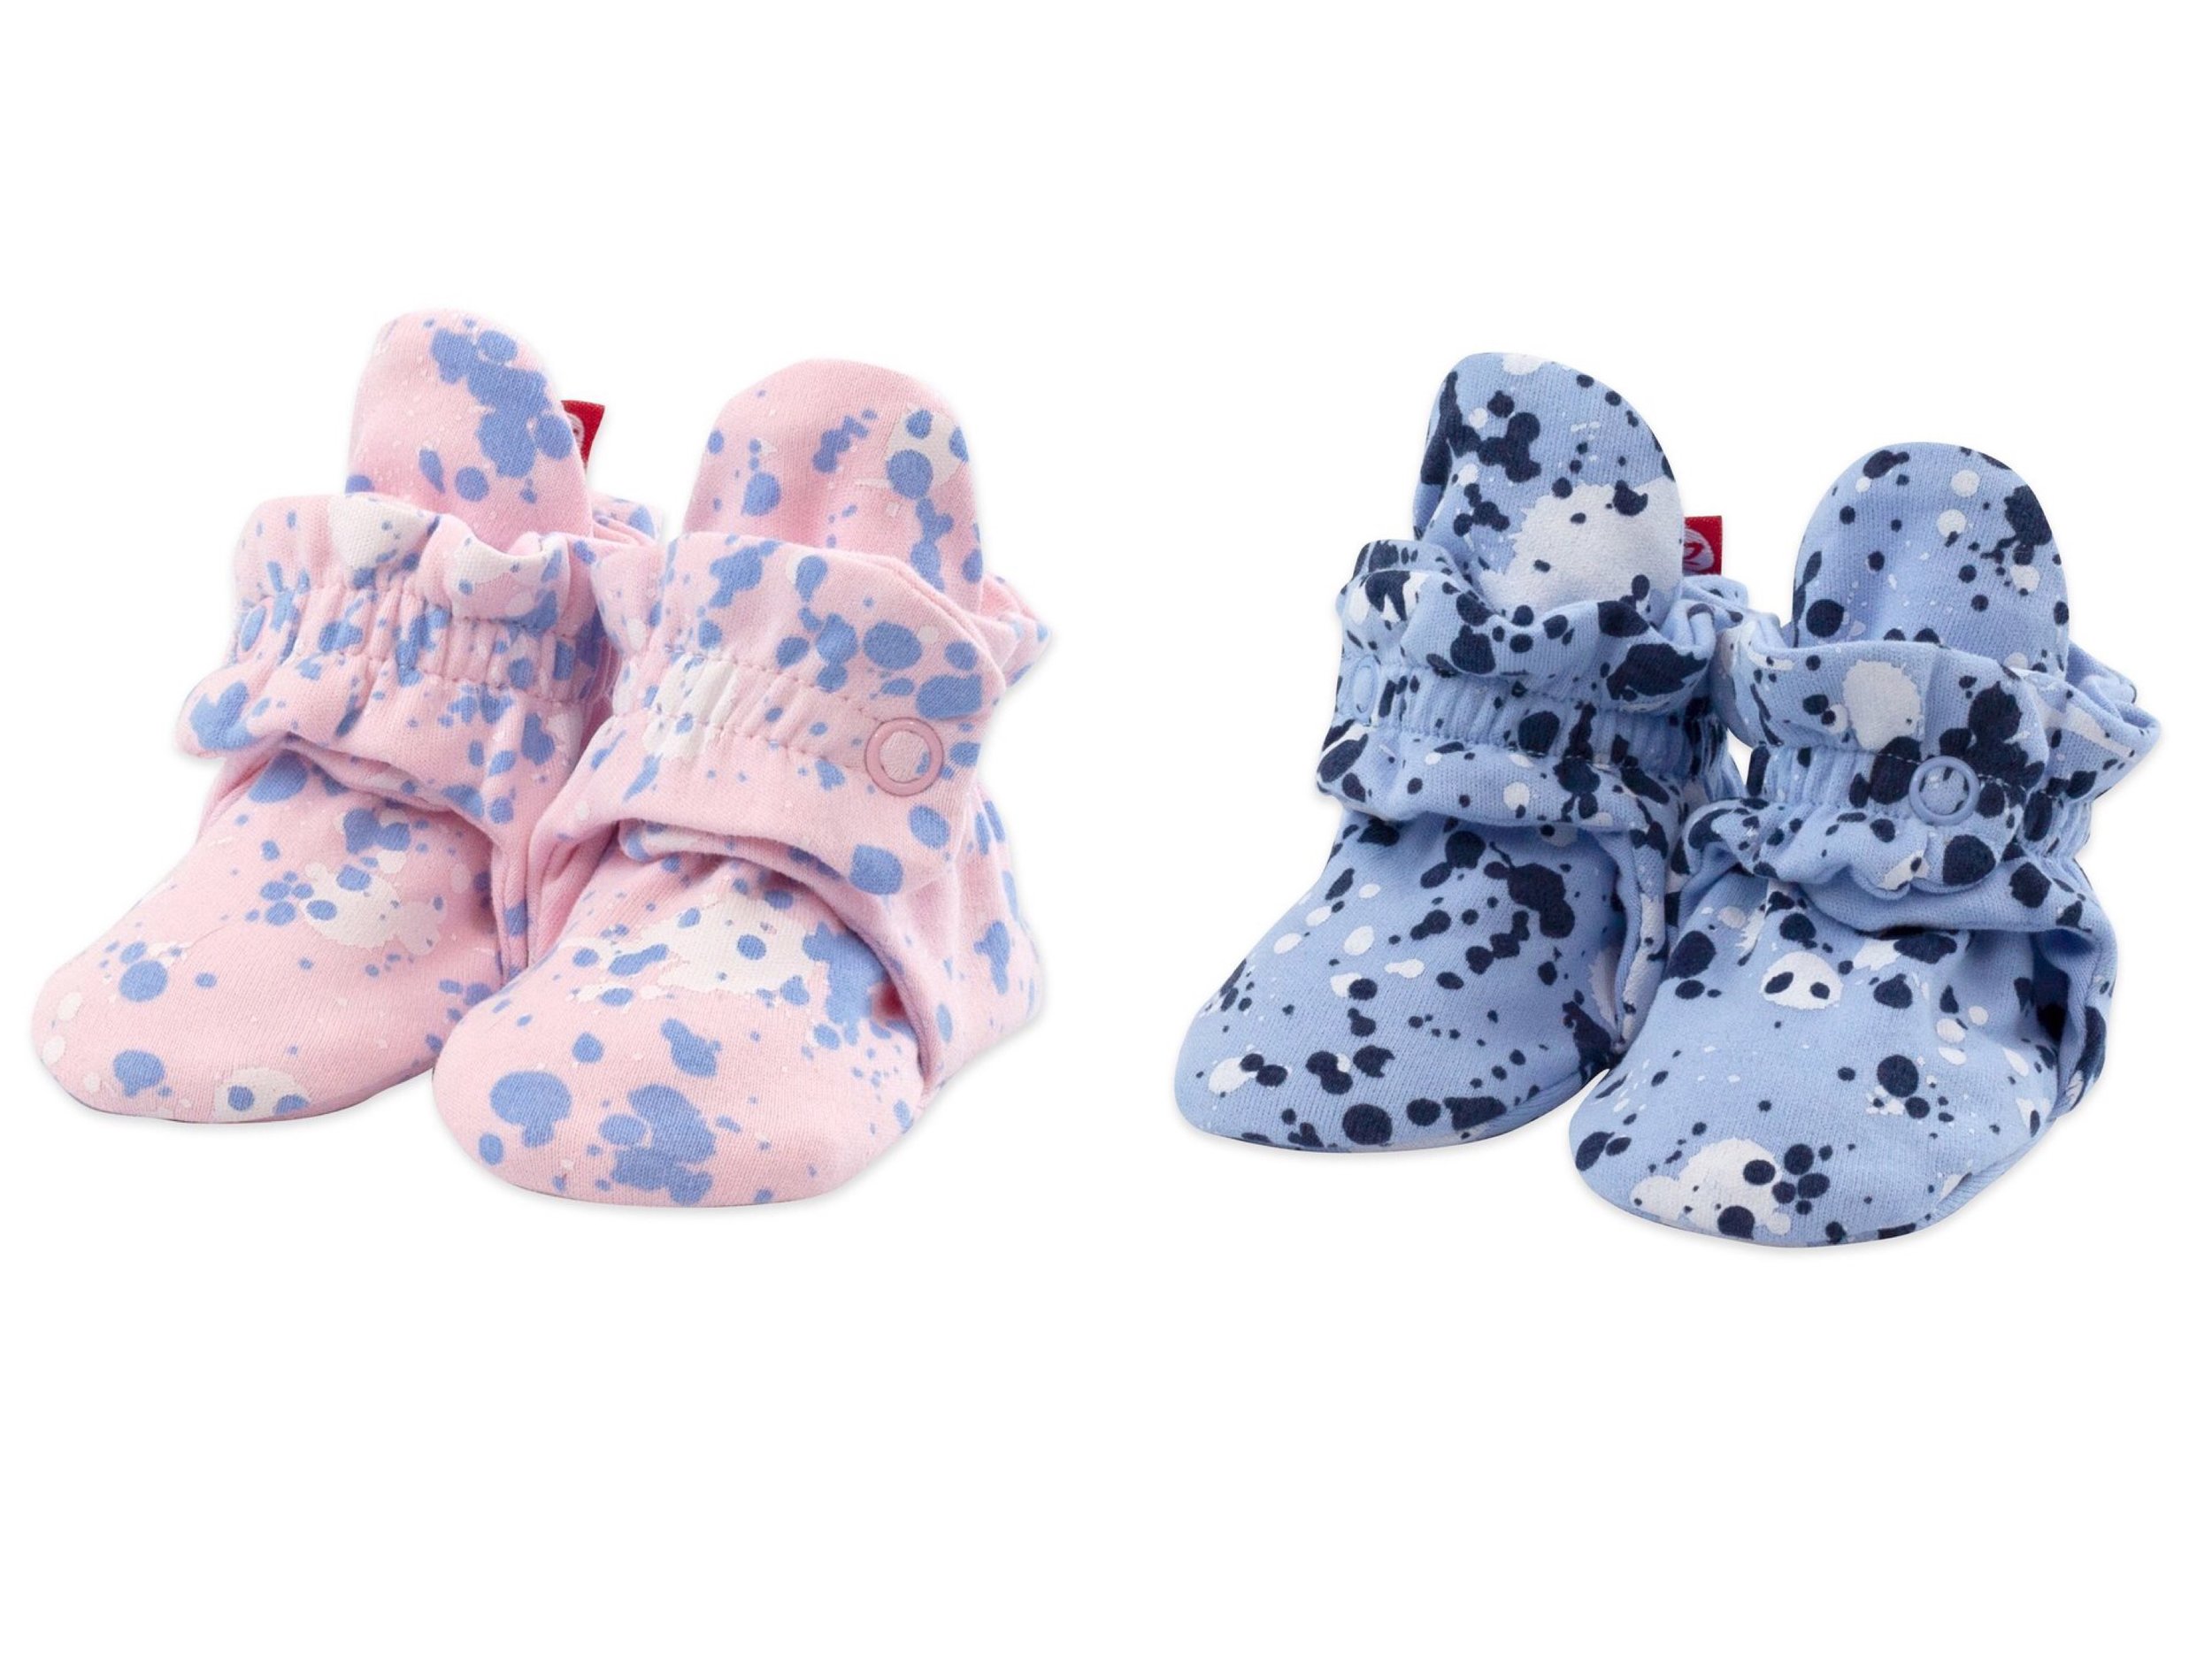 Organic Cotton Baby Booties, $21/one pair